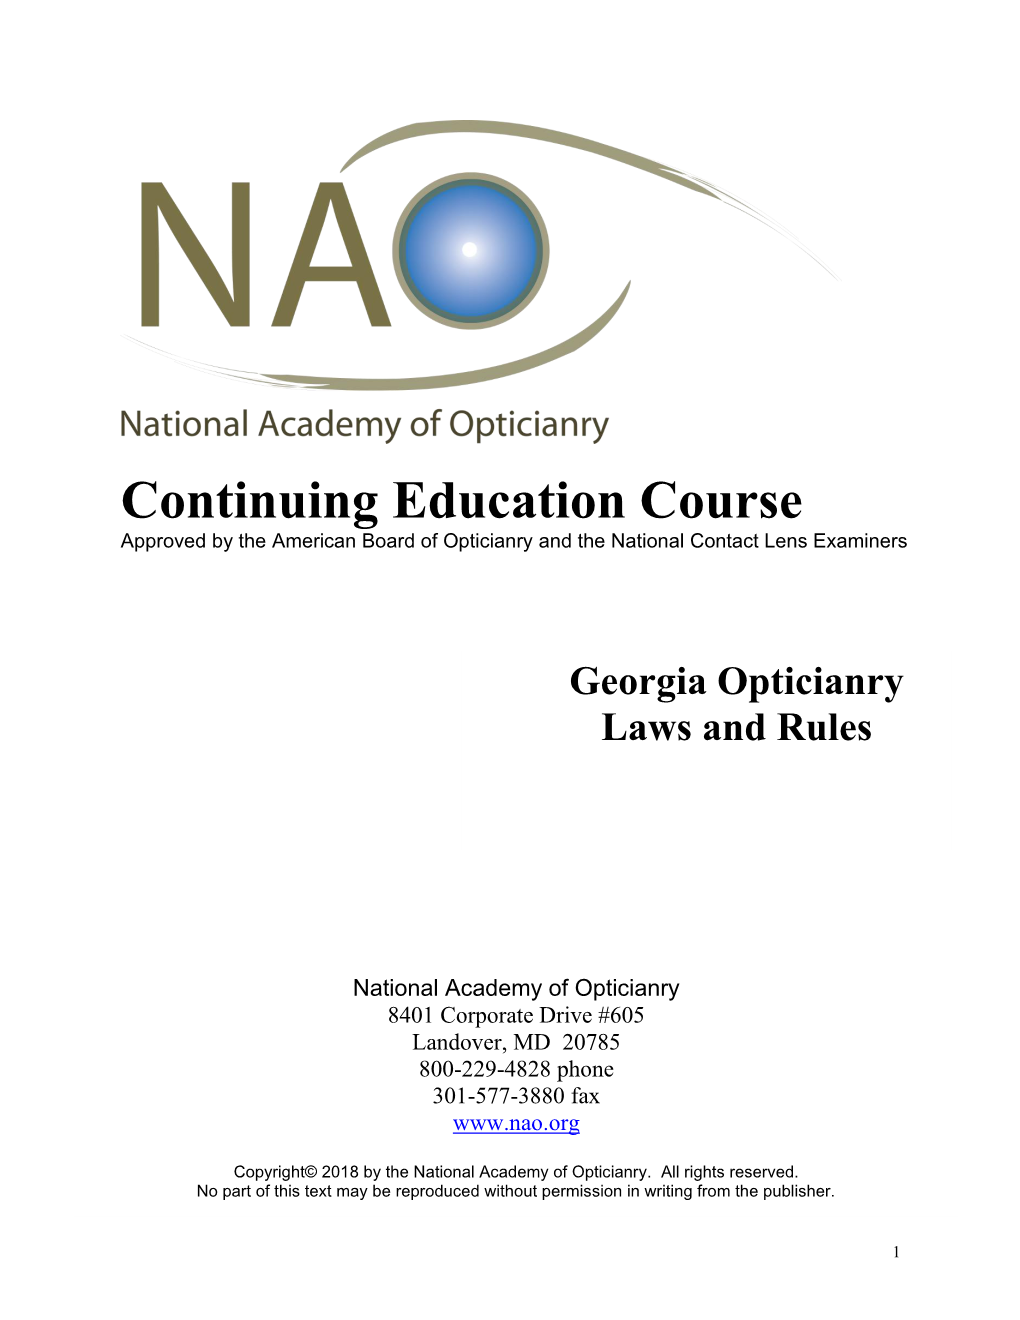 Georgia Opticianry Laws and Rules Course Documents